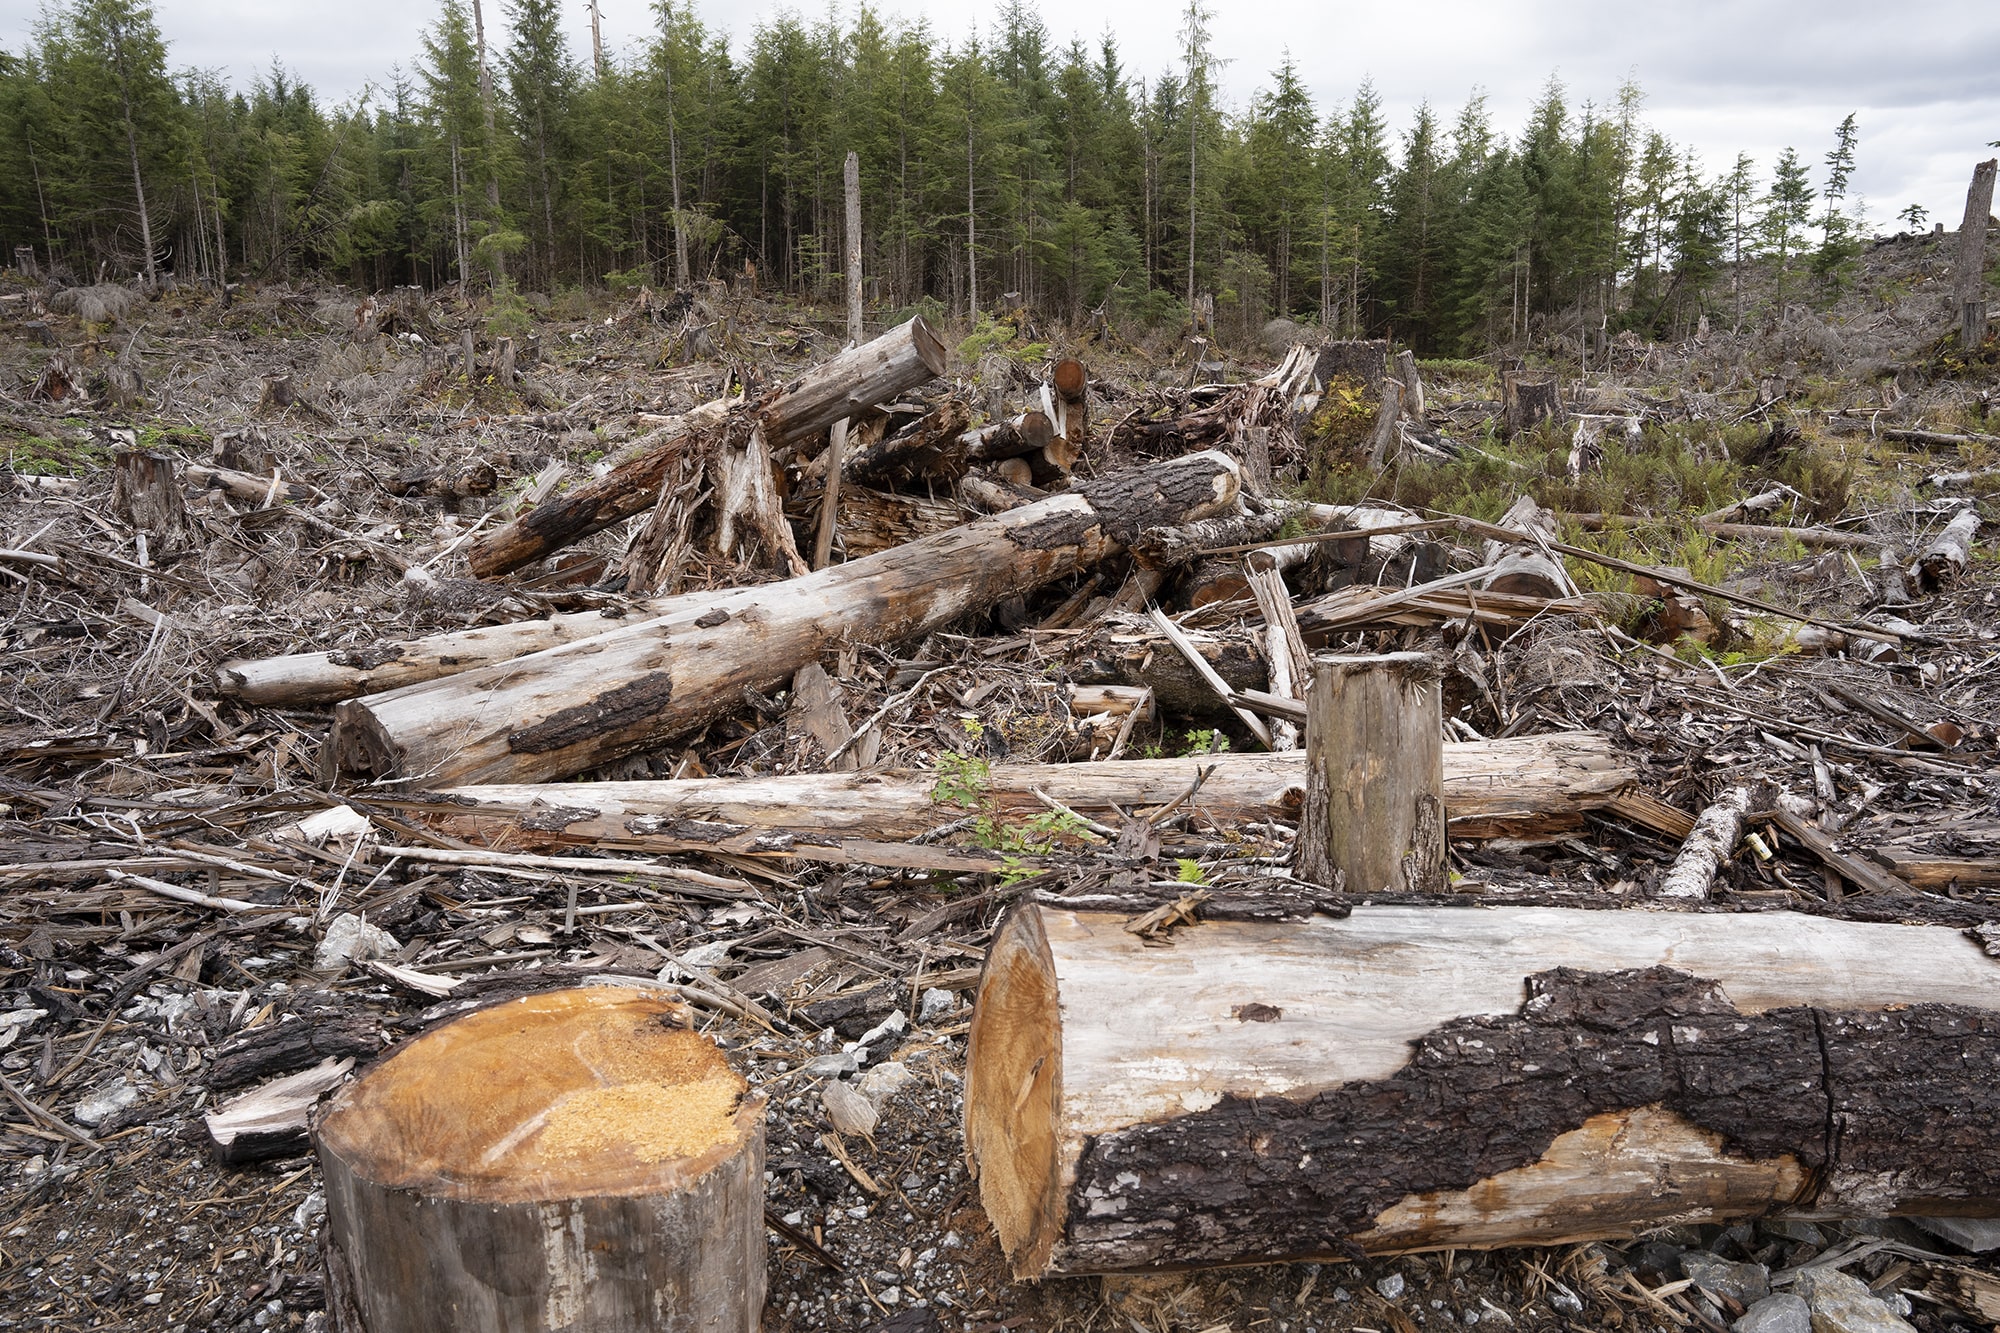 a large pile of wood debris and logs felled near a green forest